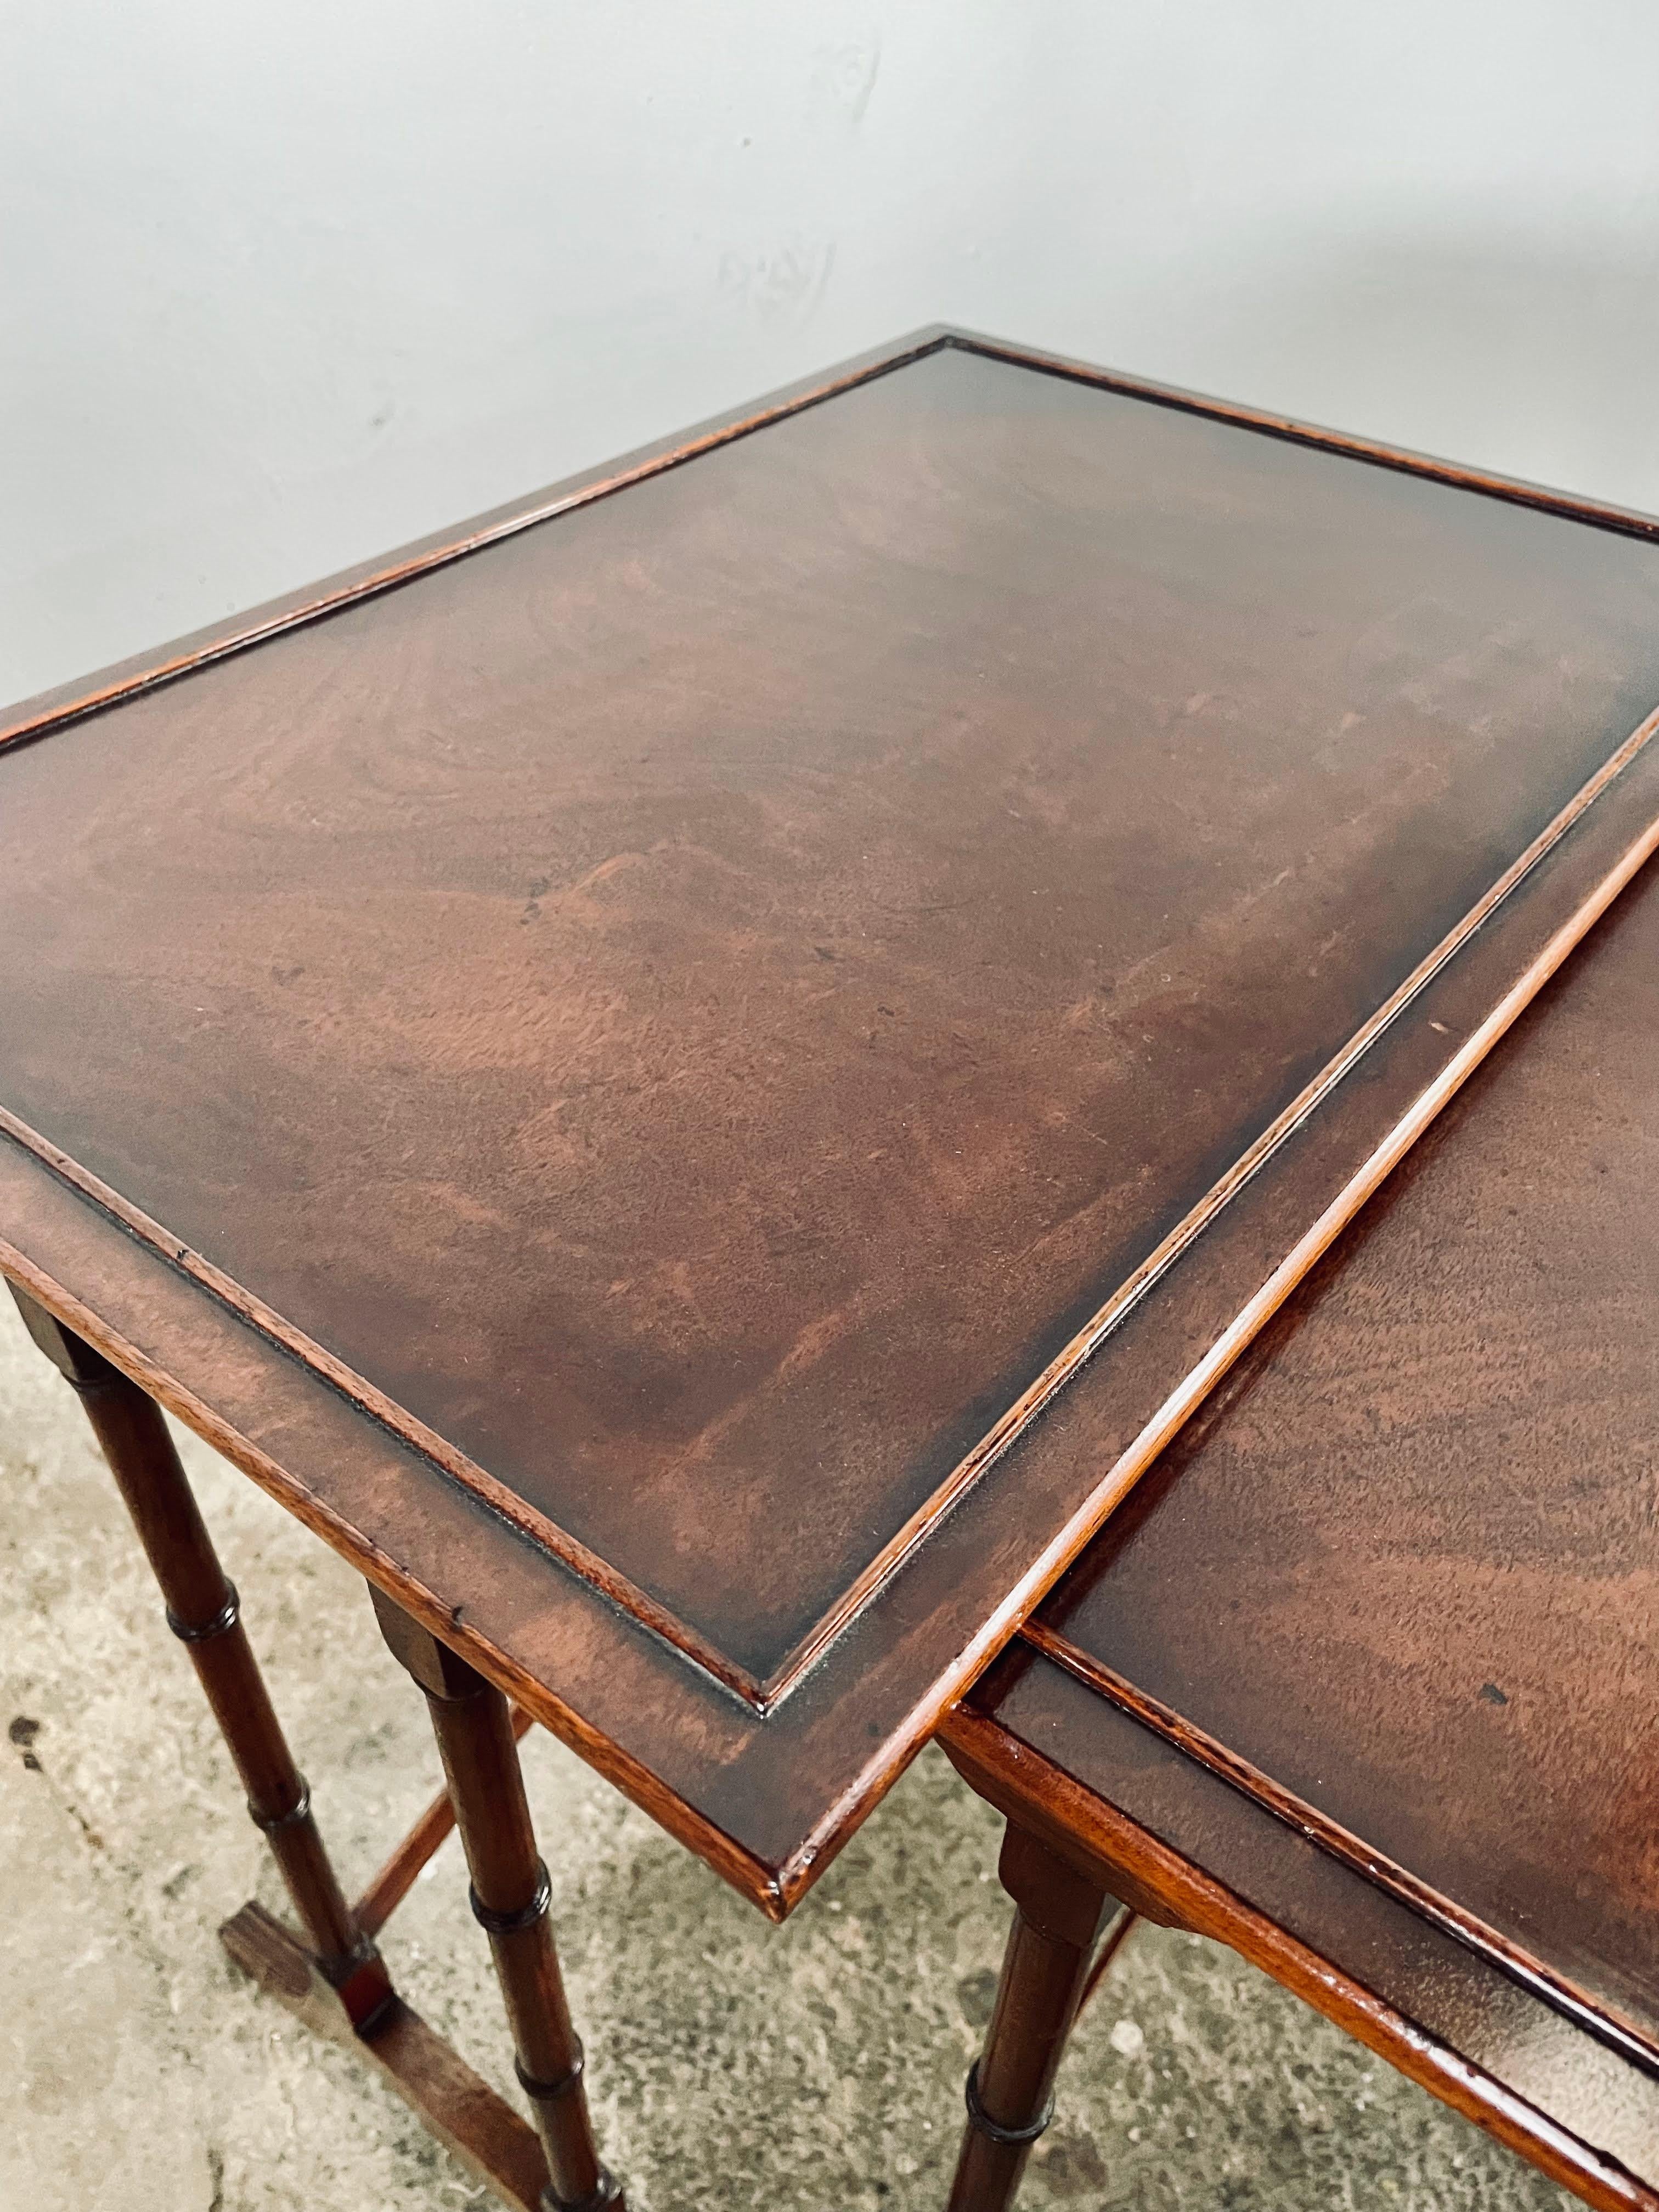 Titchmarsh & Goodwin Bespoke Mahogany Nest of Tables For Sale 1